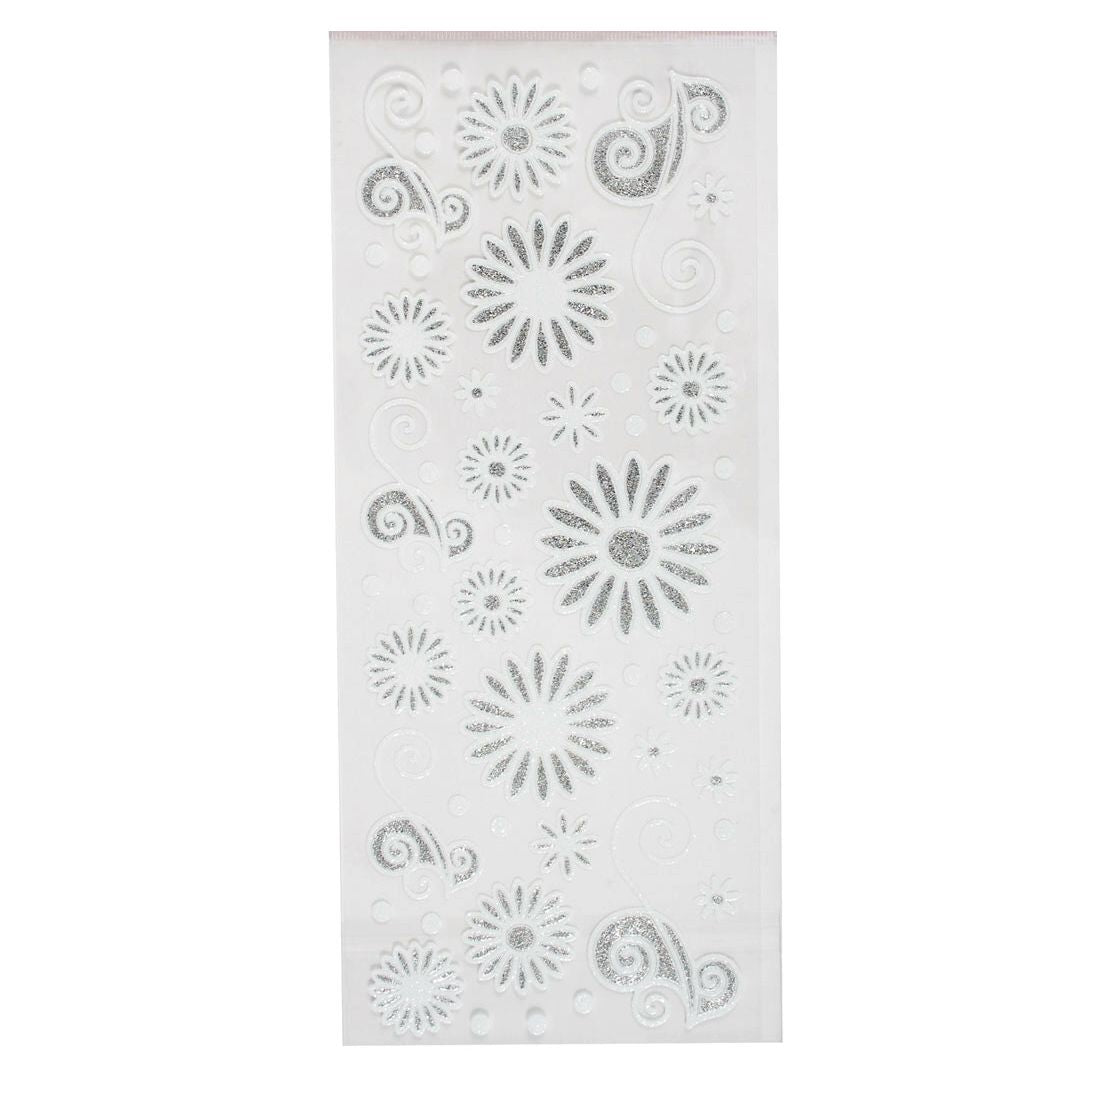 Glitterations craft stickers - Flowers white